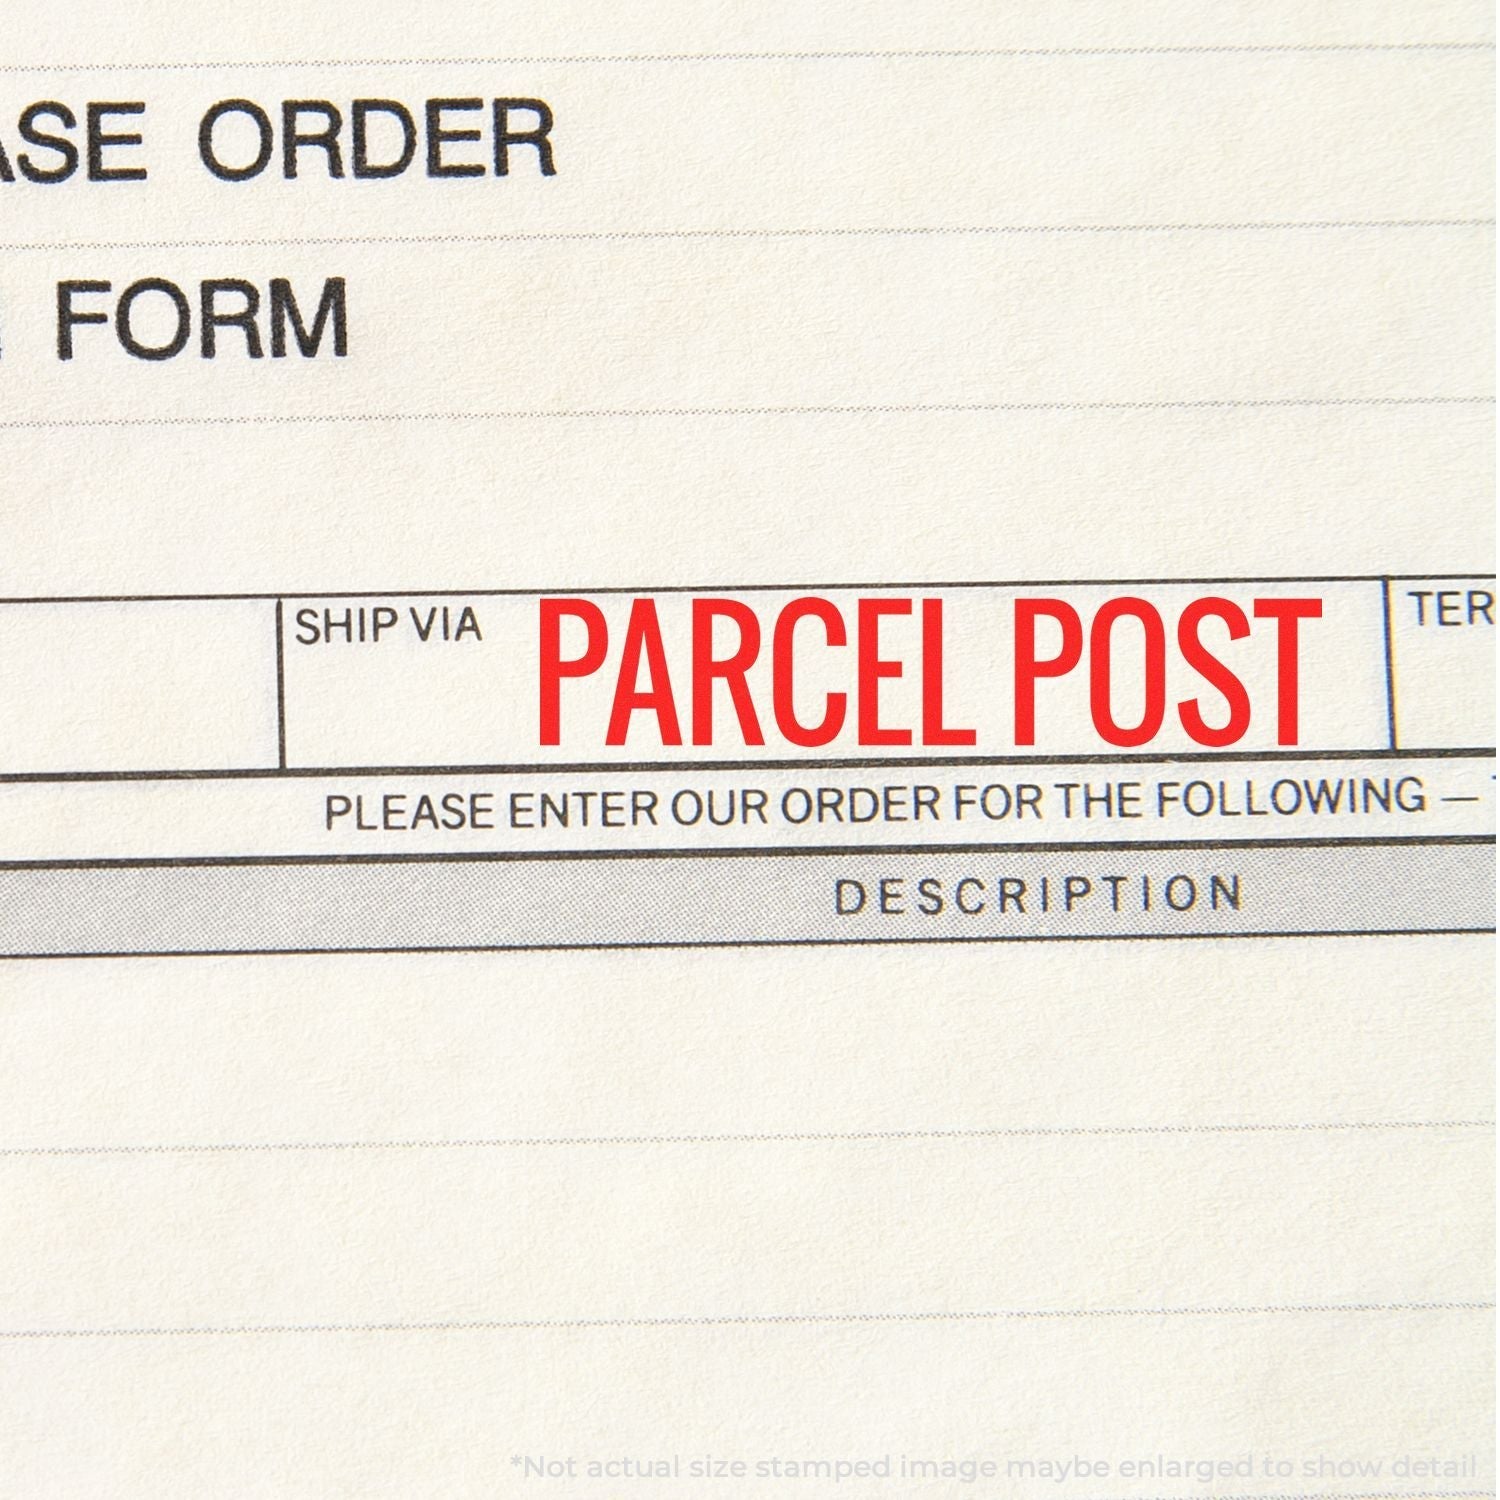 A self-inking stamp with a stamped image showing how the text "PARCEL POST" is displayed after stamping.